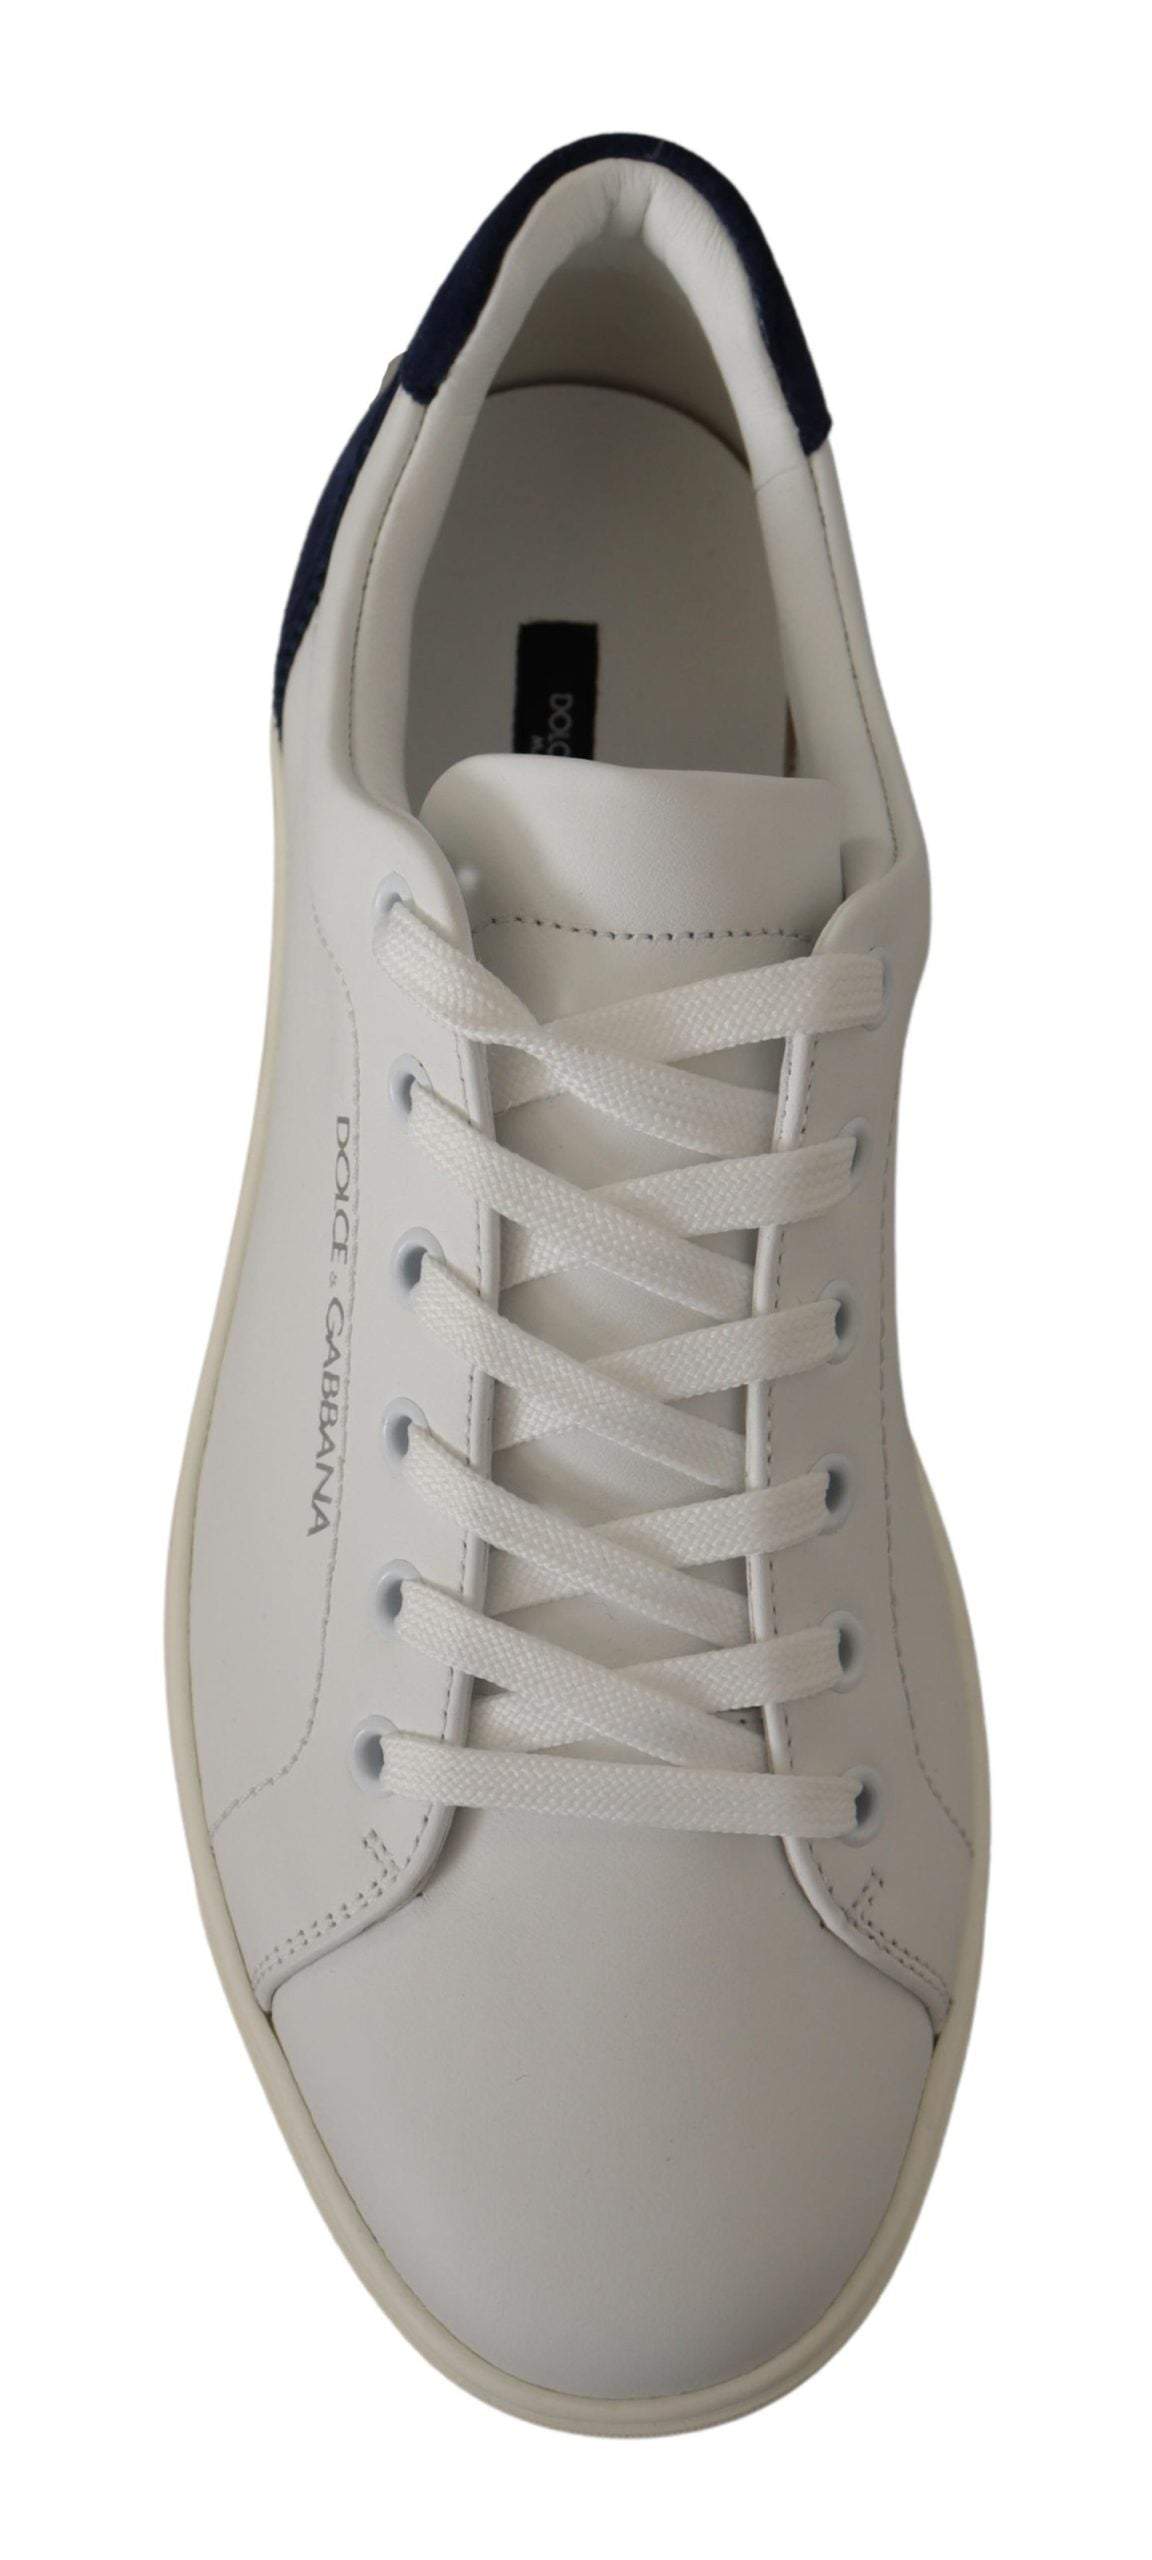 Dolce & Gabbana White Blue Leather Low Top Sneakers #men, Dolce & Gabbana, EU39/US6, EU40/US7, feed-1, Sneakers - Men - Shoes, White at SEYMAYKA